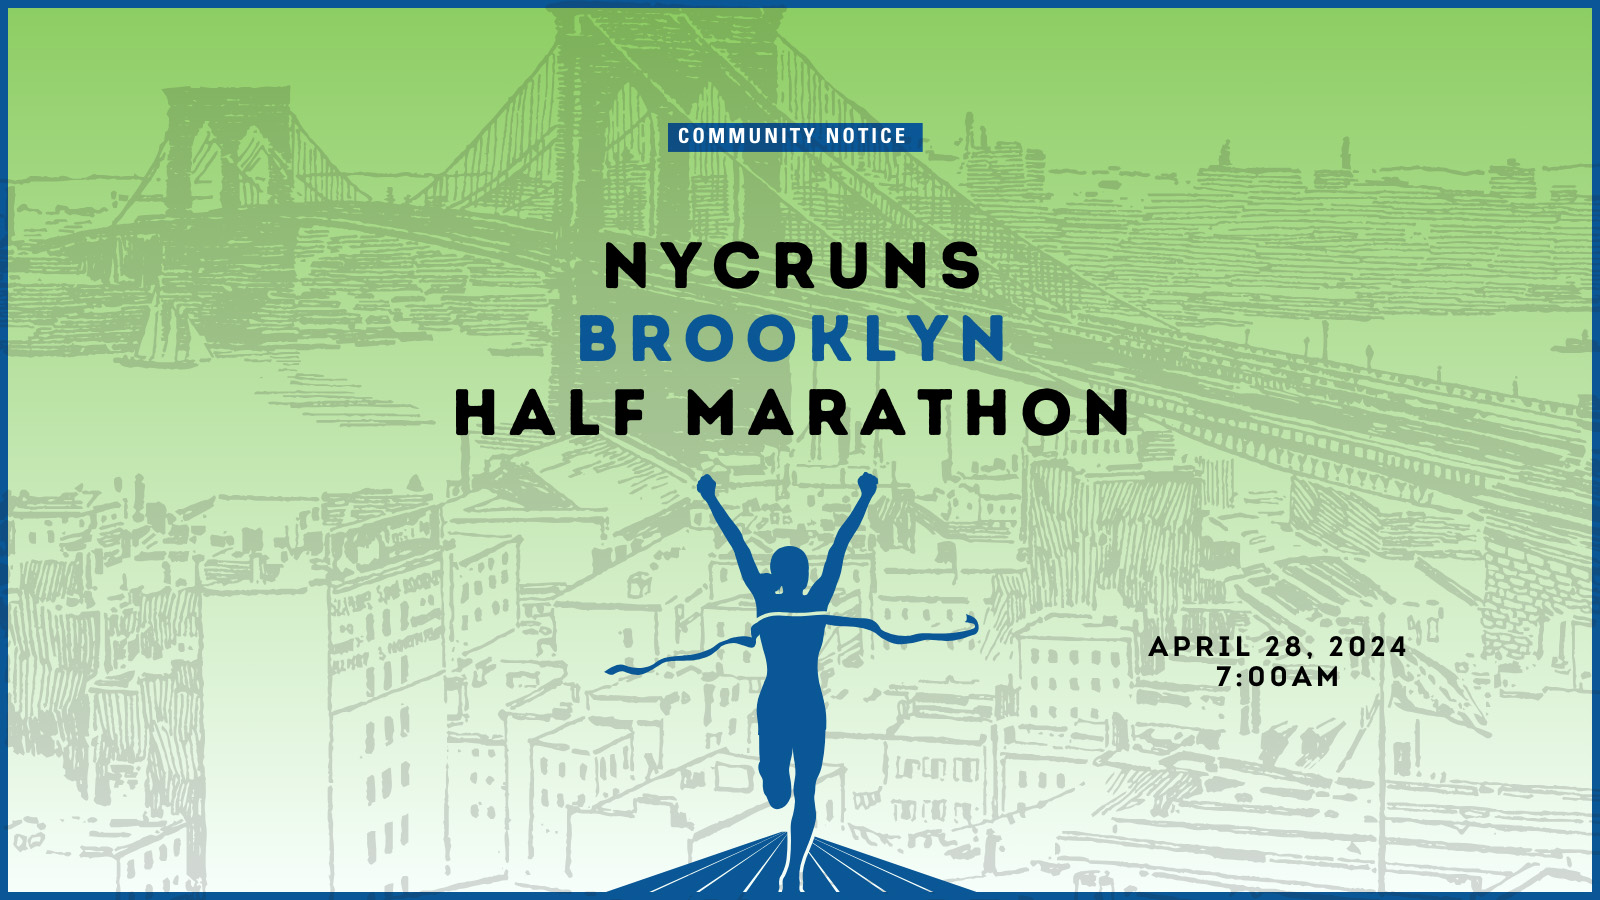 : Image with light green background, the Brooklyn bridge skyline and a runner crossing a finish line. Text says Community Notice N Y C RUNS Brooklyn Half Marathon, April 28, 2024, 7 A M.